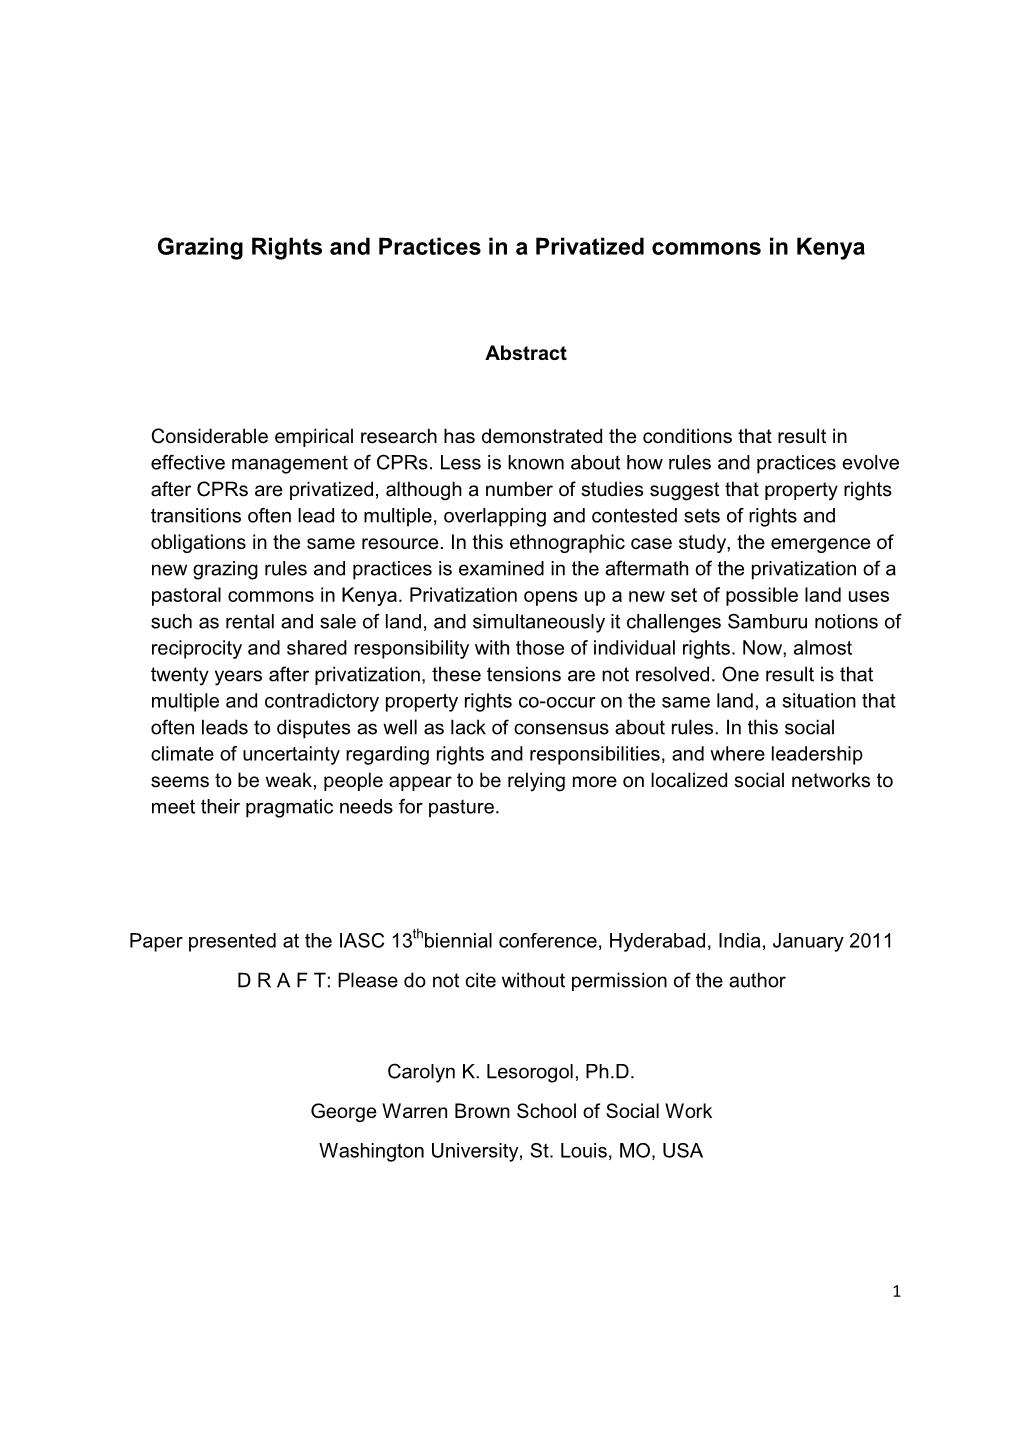 Grazing Rights and Practices in a Privatized Commons in Kenya